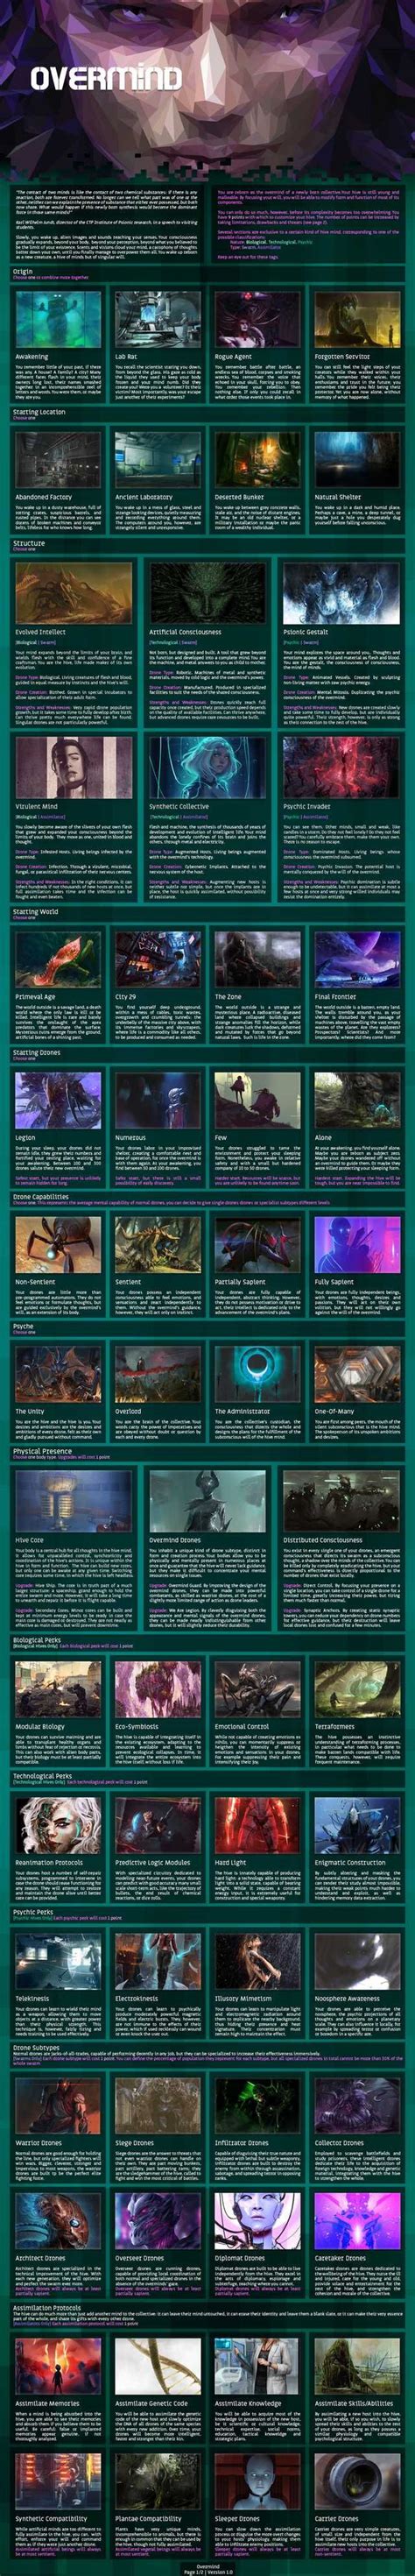 What about a Harry Potter one or Star trek voyager. . Imgur cyoa